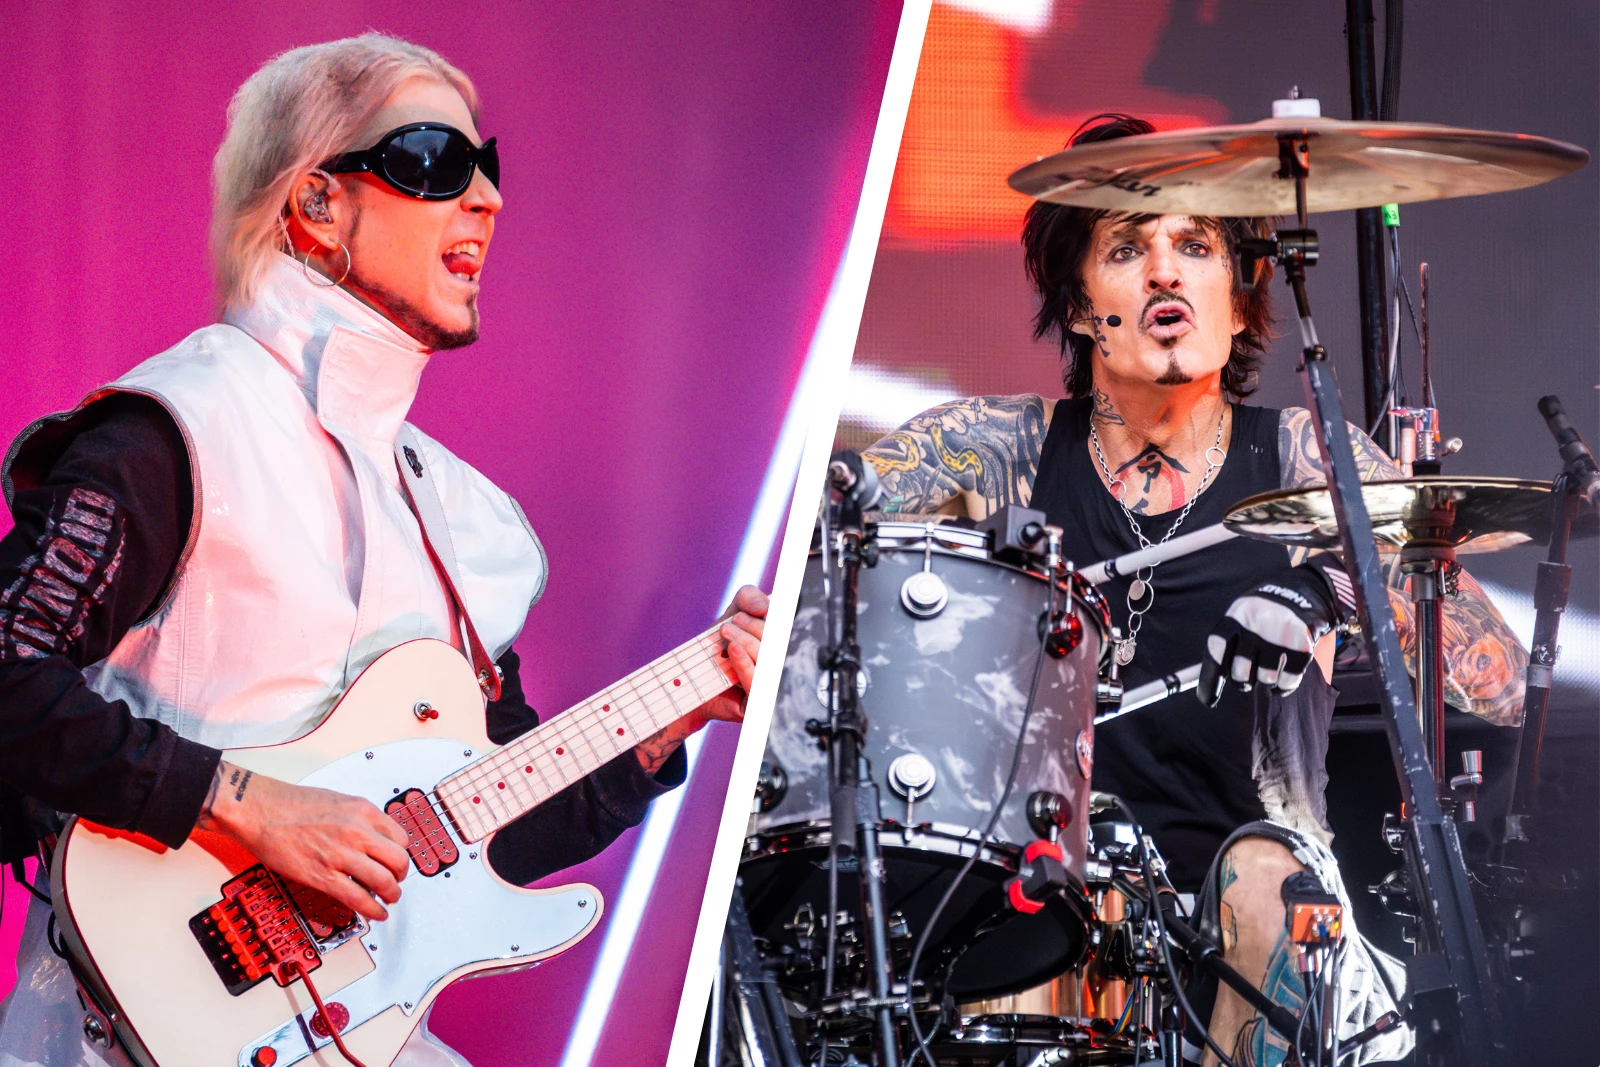 Interview: Tommy Lee + John 5 Discuss Motley Crue’s New Song